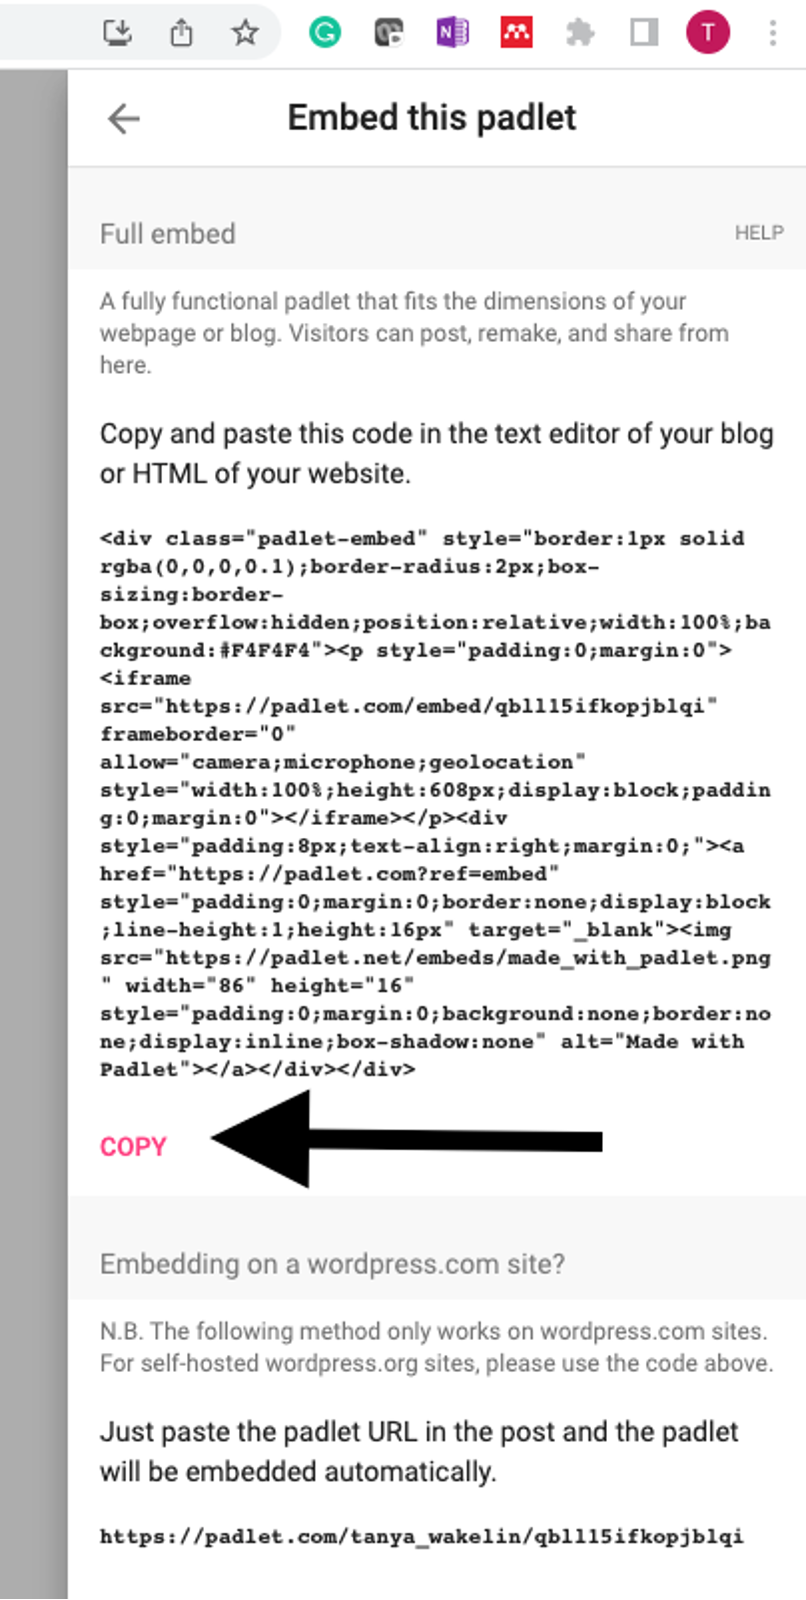 Screenshot of Padlet share settings. Arrow points to “Copy” share option. Embed code to Padlet displayed above “Copy” share option